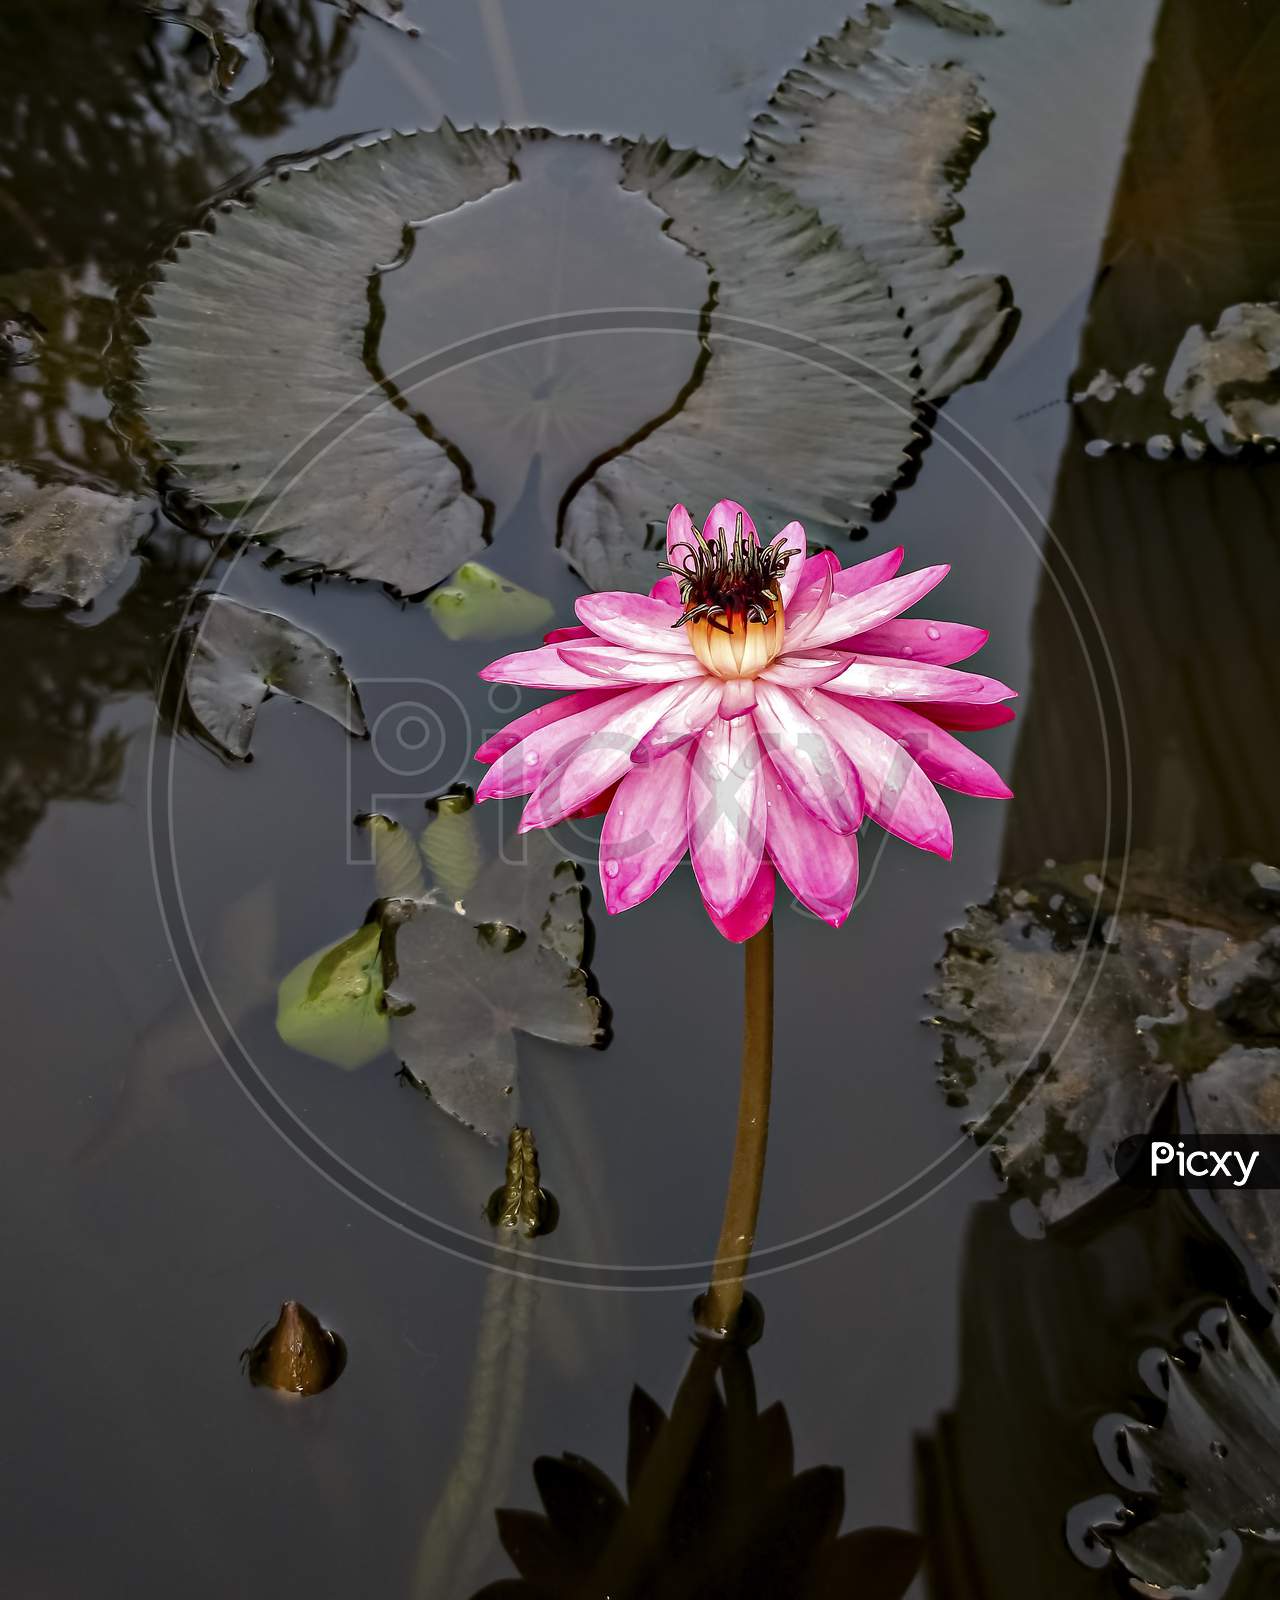 Close Up Image Of A Beautiful Dark Pink Lotus Flower With Leaves In Water.